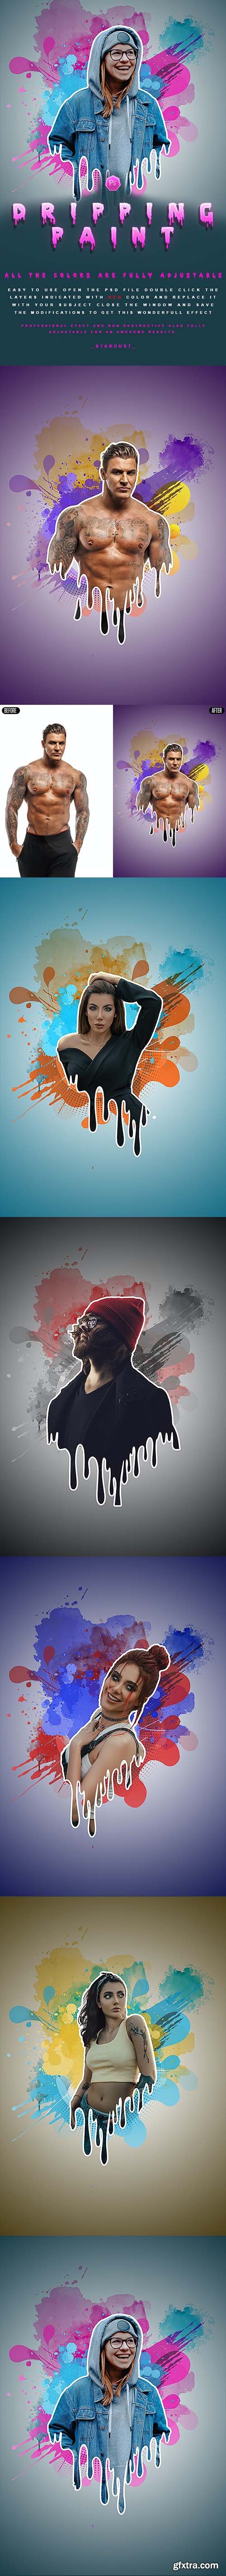 GraphicRiver - Dripping Painting - Photoshop Effect 33083741